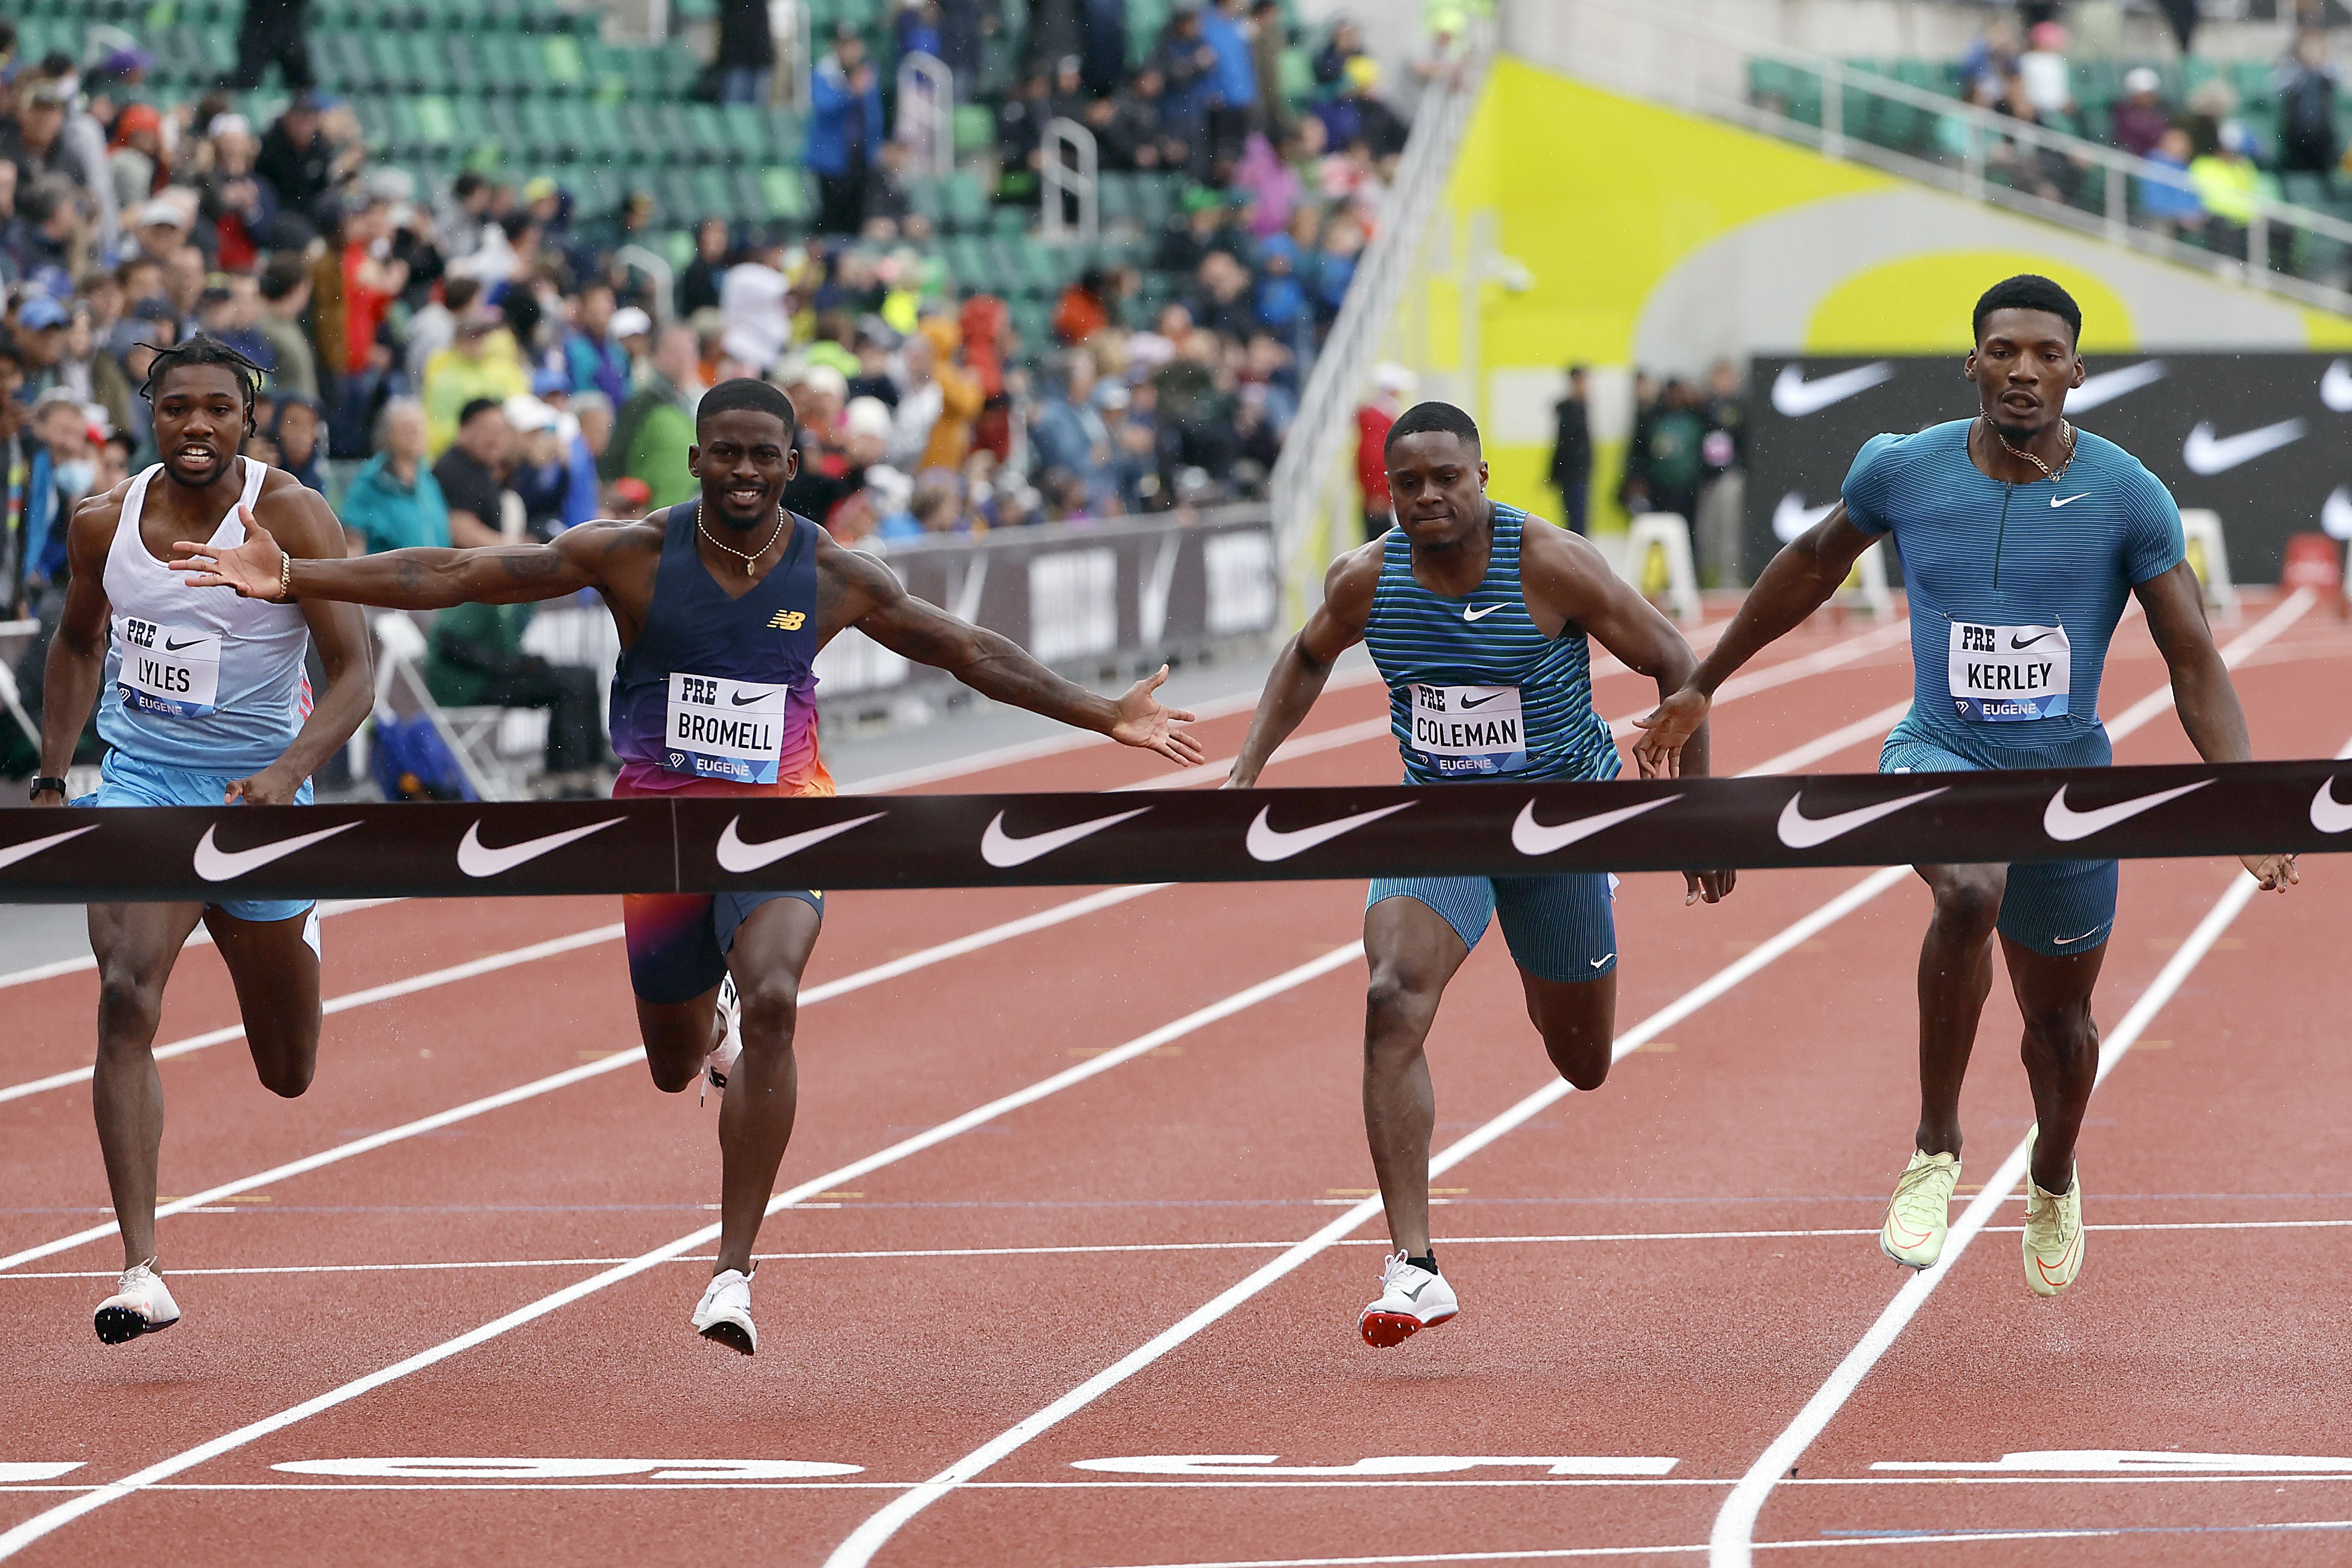 watch world track and field championships